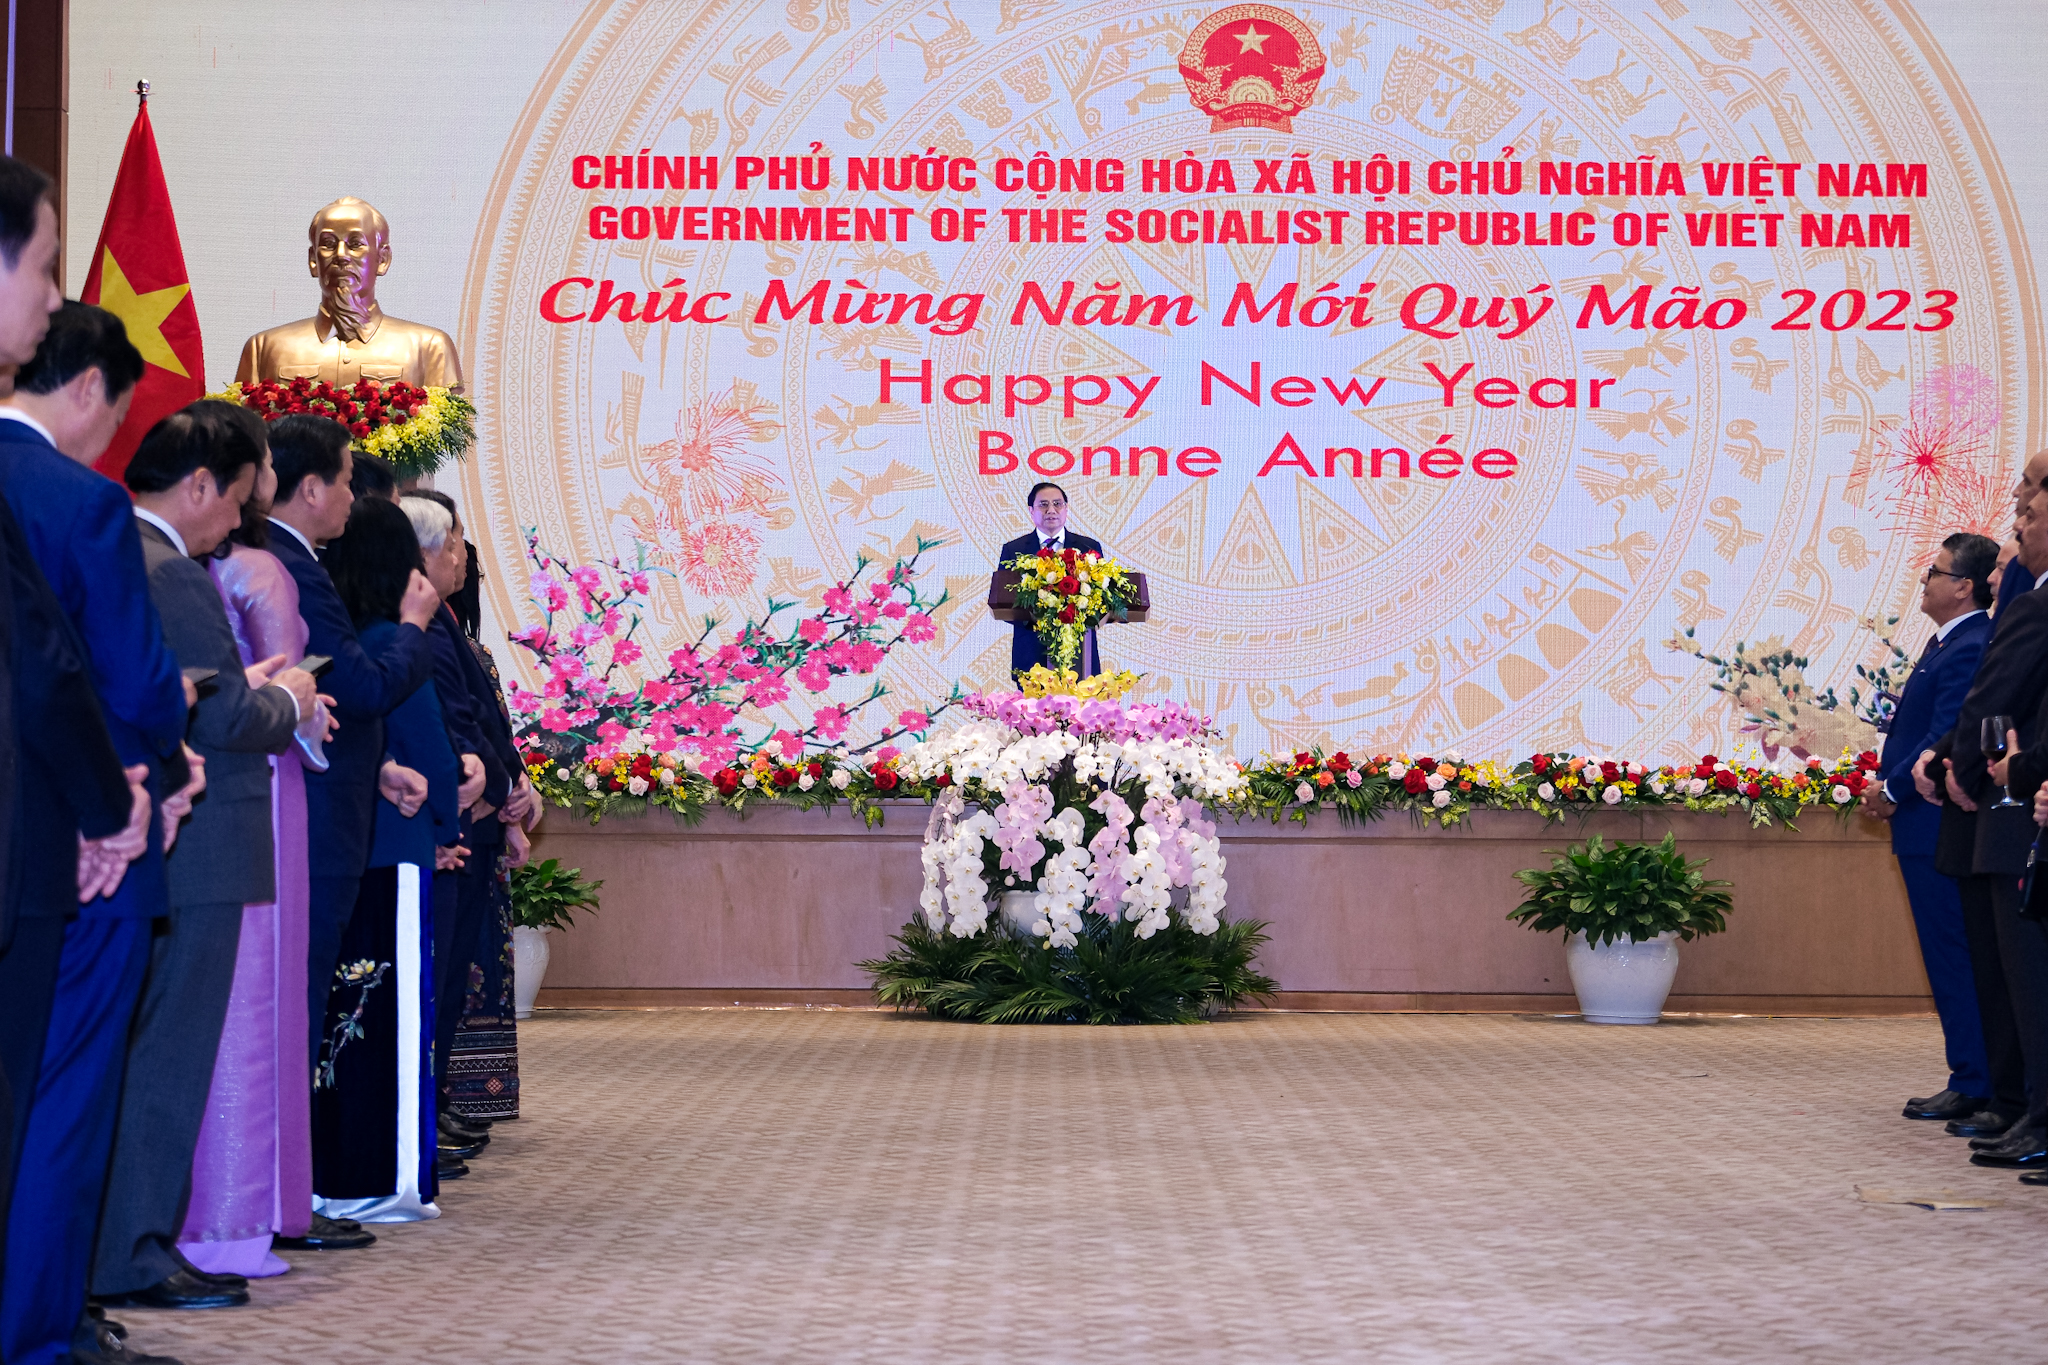 Vietnamese premier hosts banquet for diplomatic corps ahead of Tet holiday